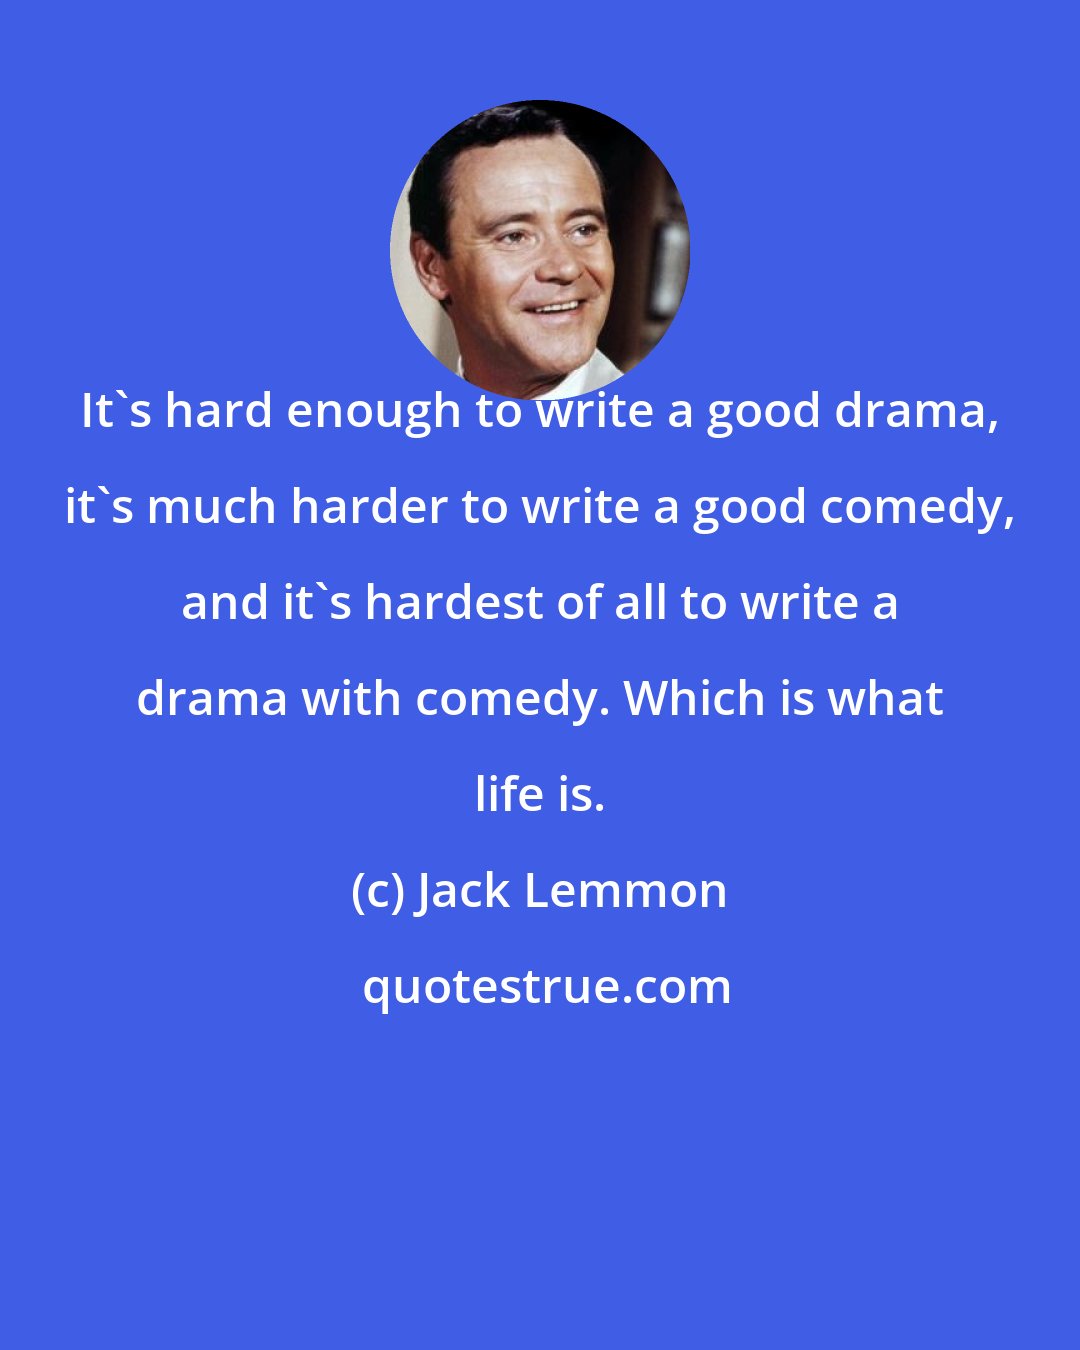 Jack Lemmon: It's hard enough to write a good drama, it's much harder to write a good comedy, and it's hardest of all to write a drama with comedy. Which is what life is.